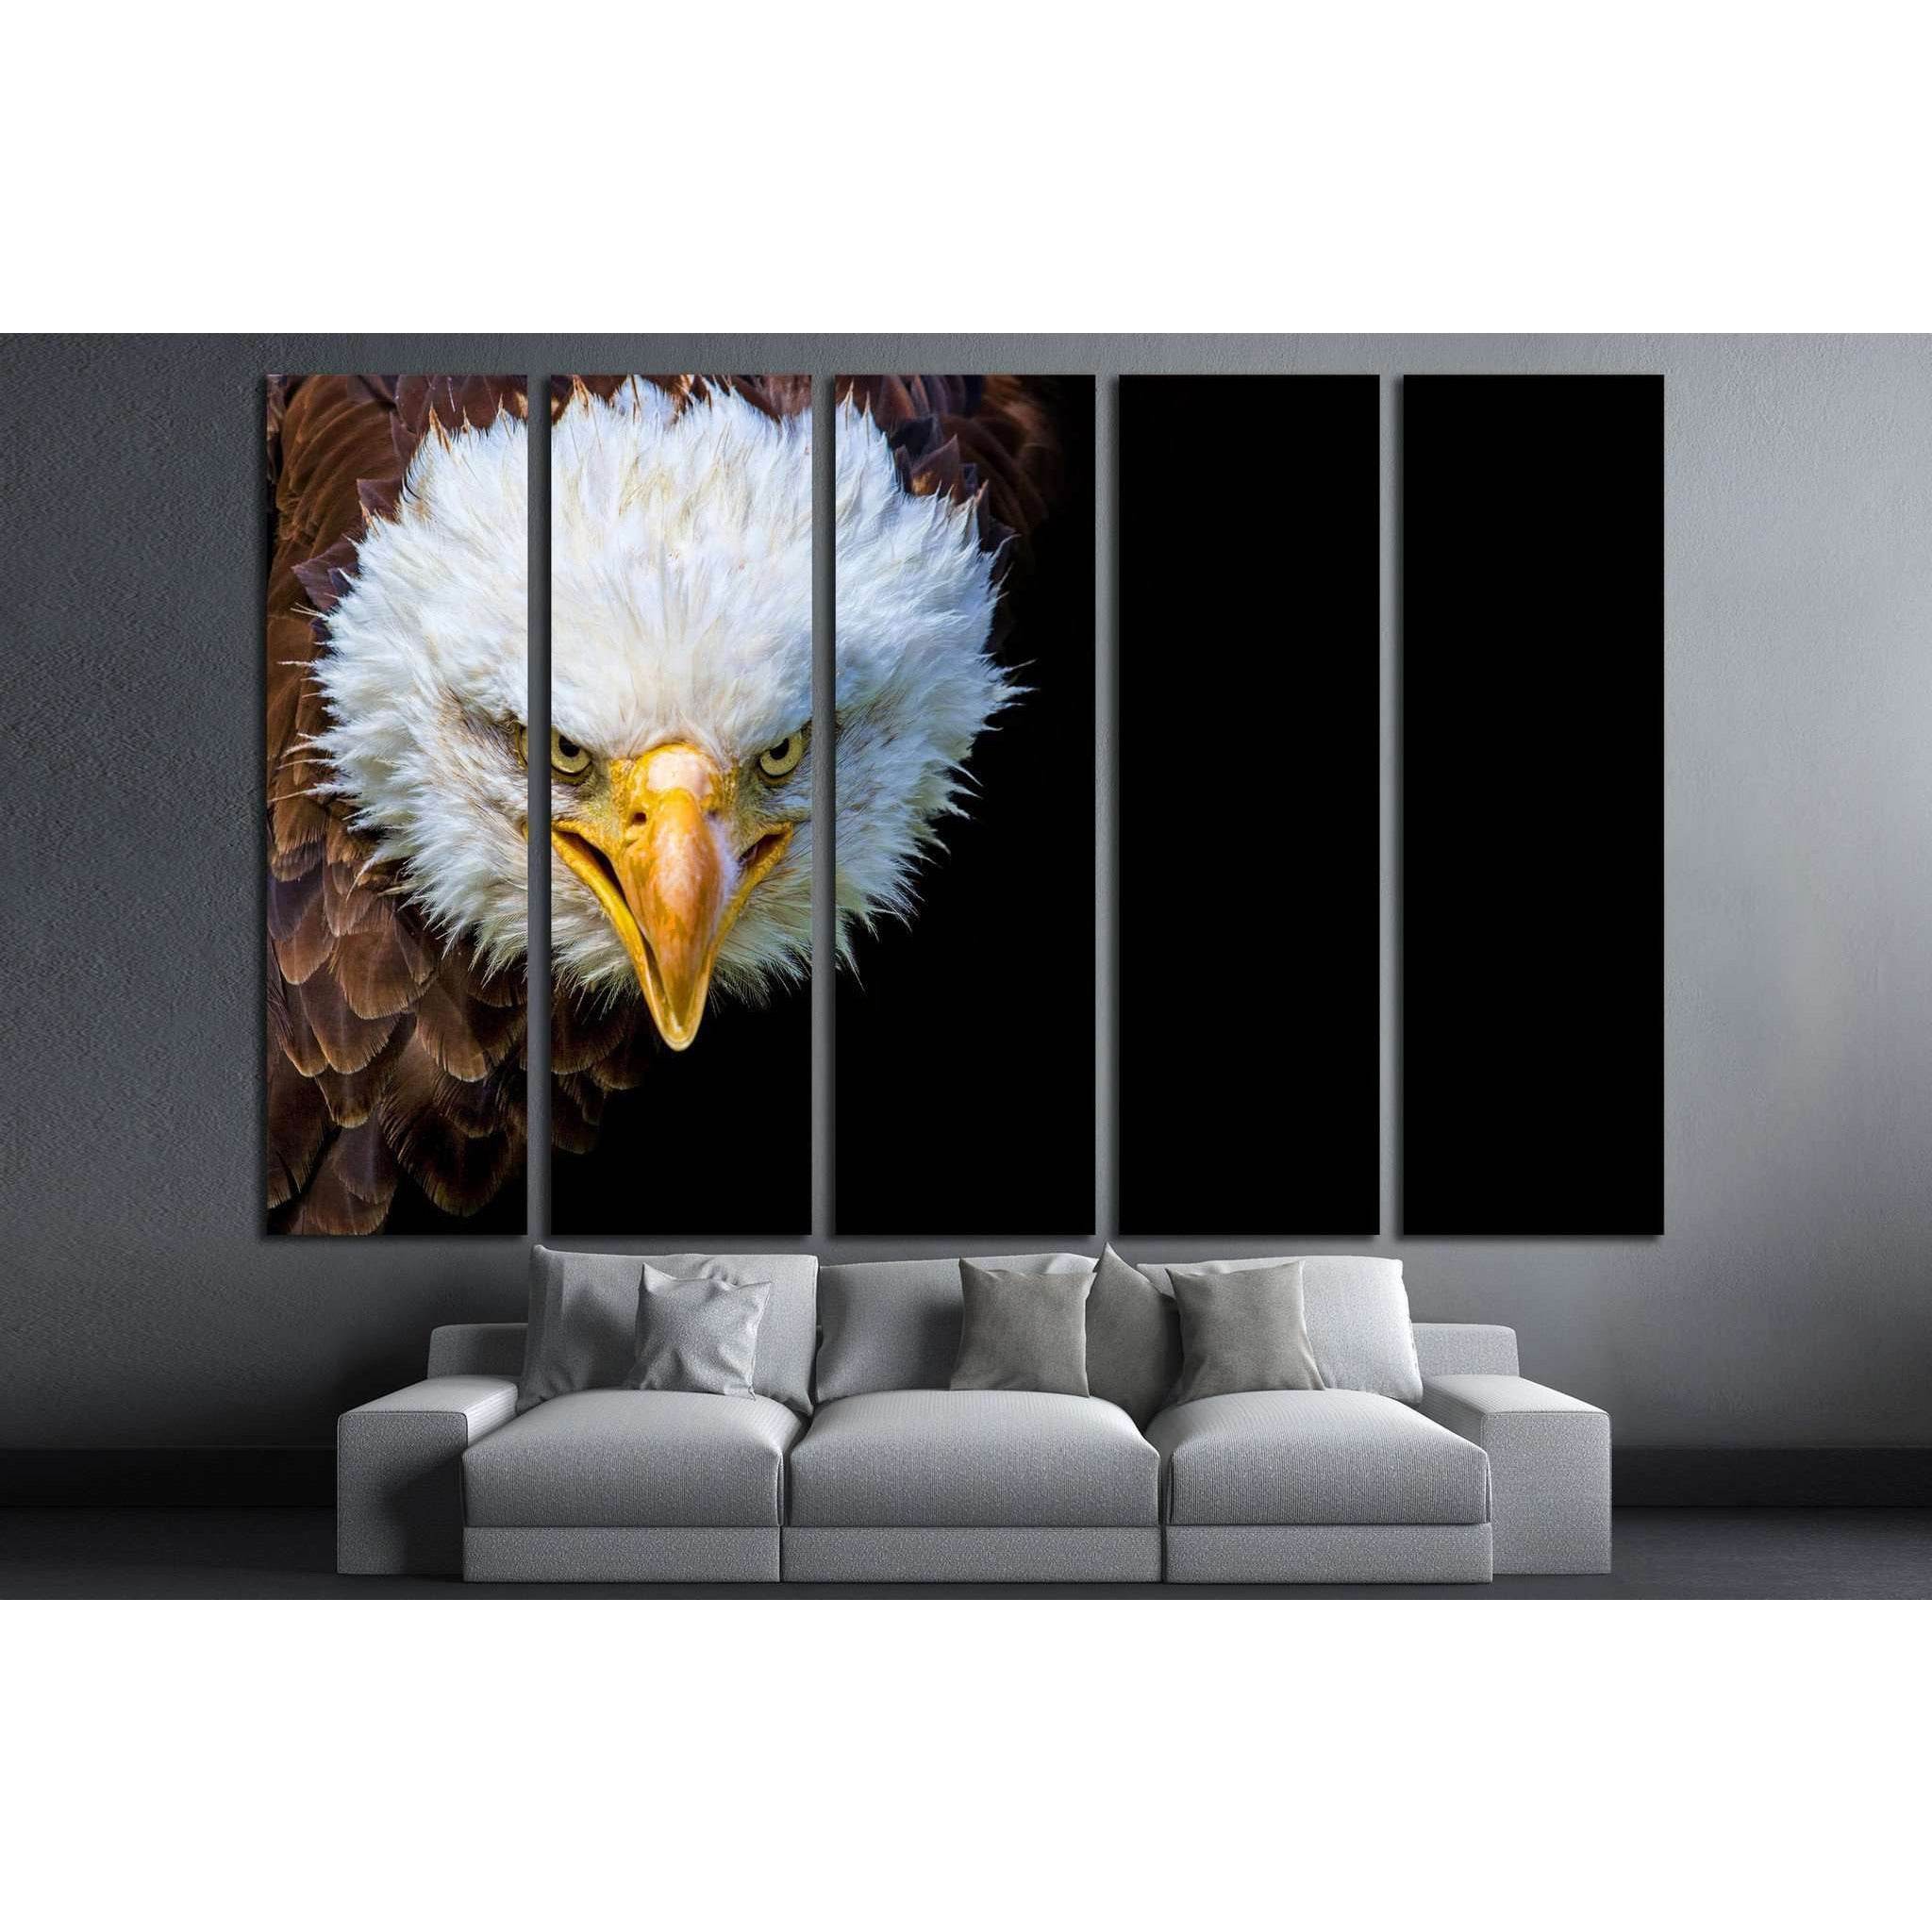 Angry north american bald eagle on black background №1863 Ready to Hang Canvas Print